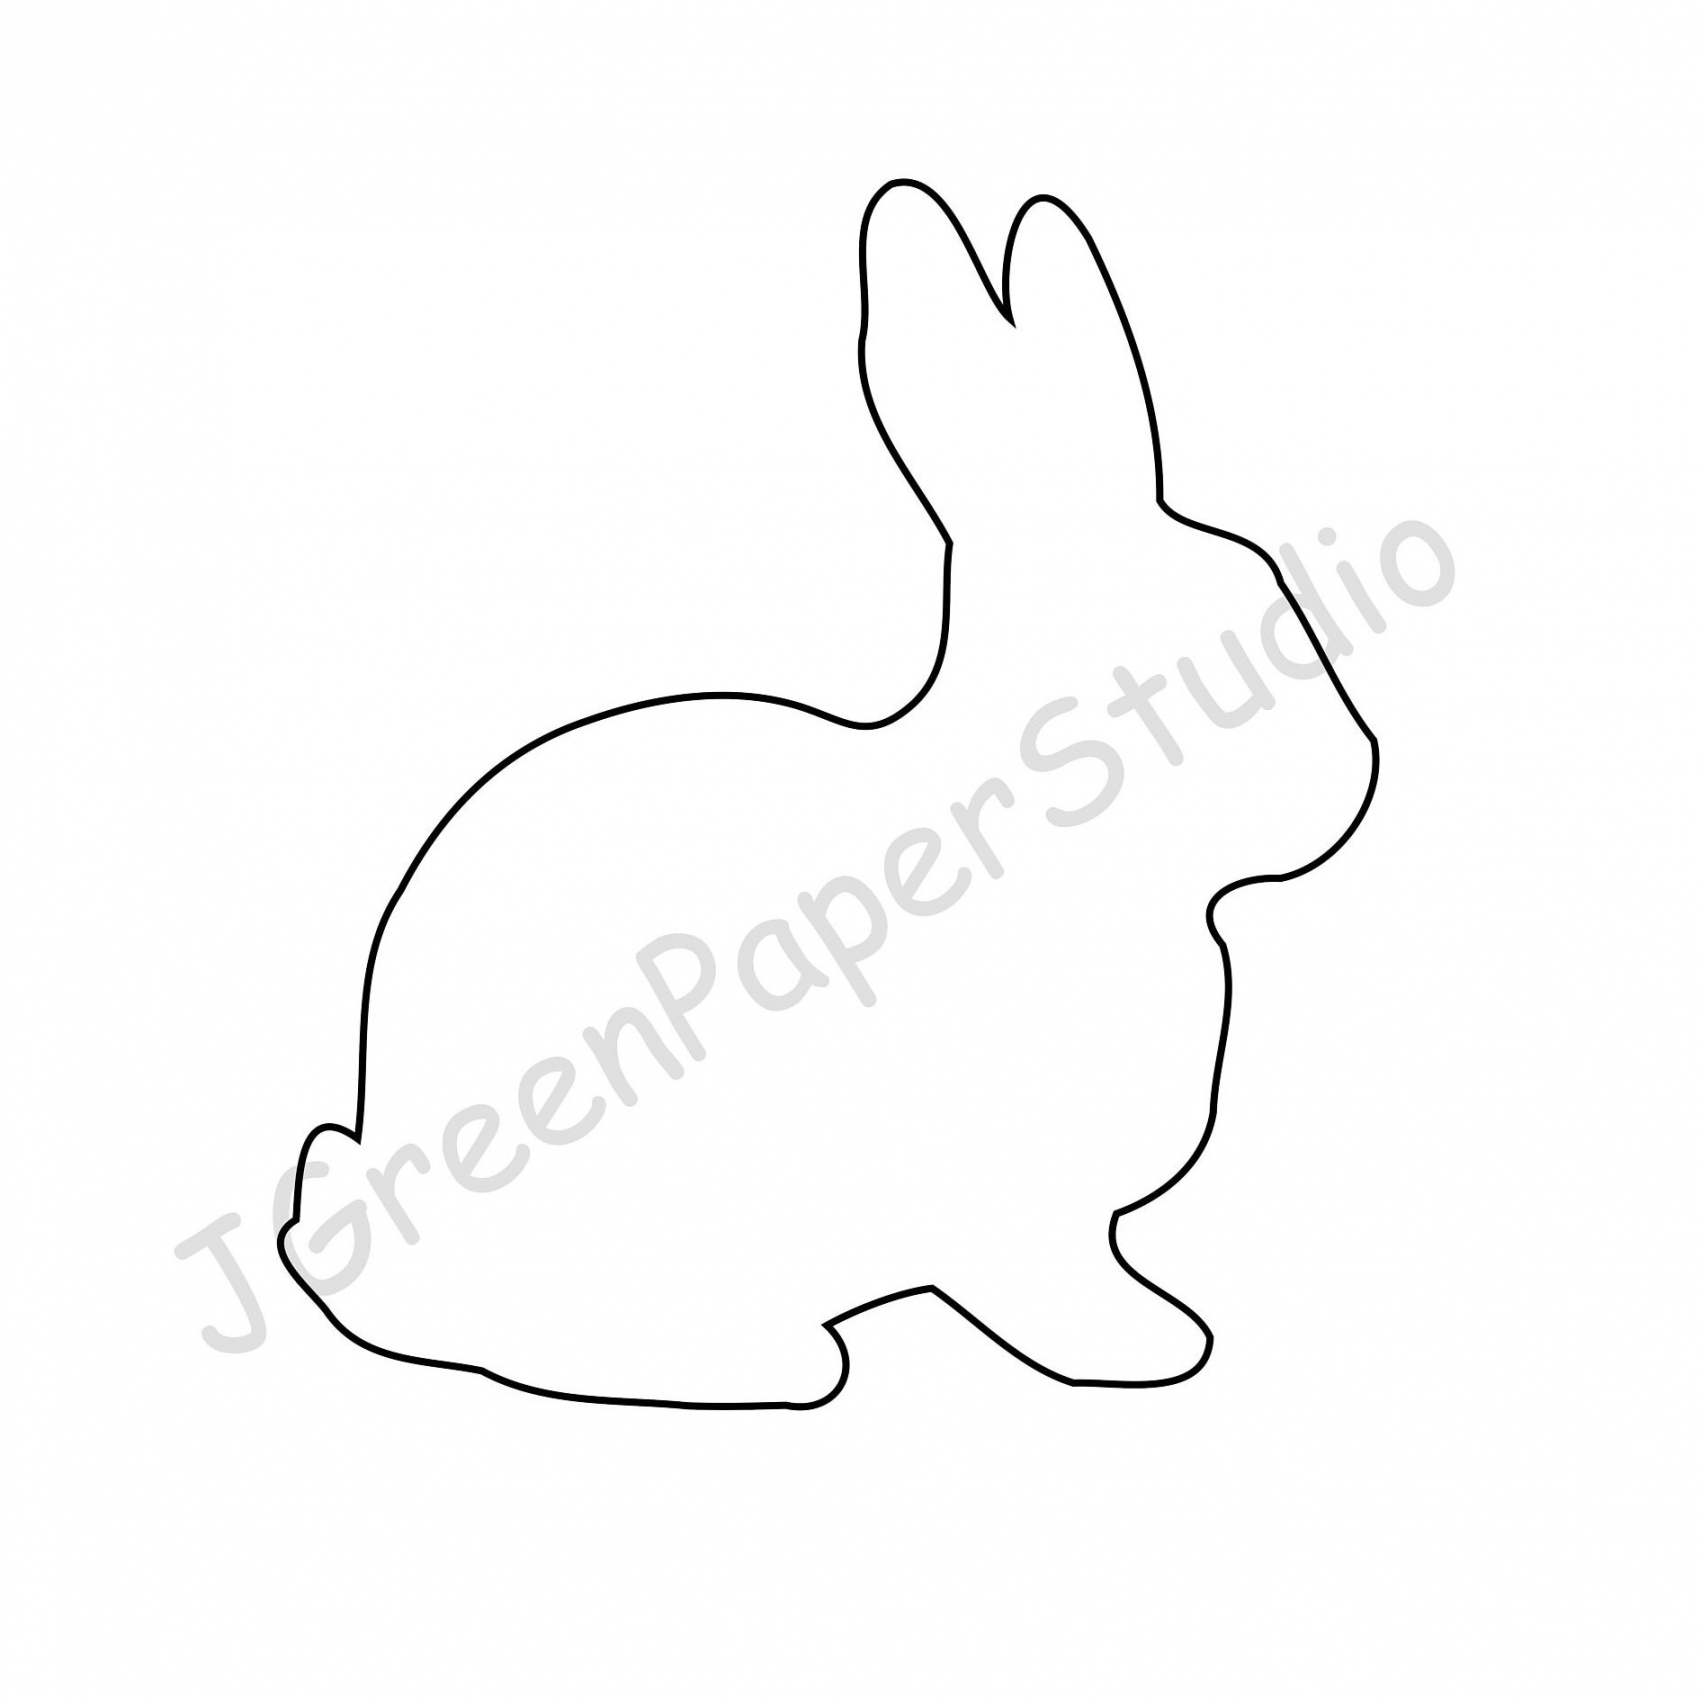 Printable Rabbit Template-PDF Digital Download Bunny Kids Coloring Page  Kids Crafts Stencil  inch Easter Bunny DIY Craft - FREE Printables - Bunny Rabbit Template